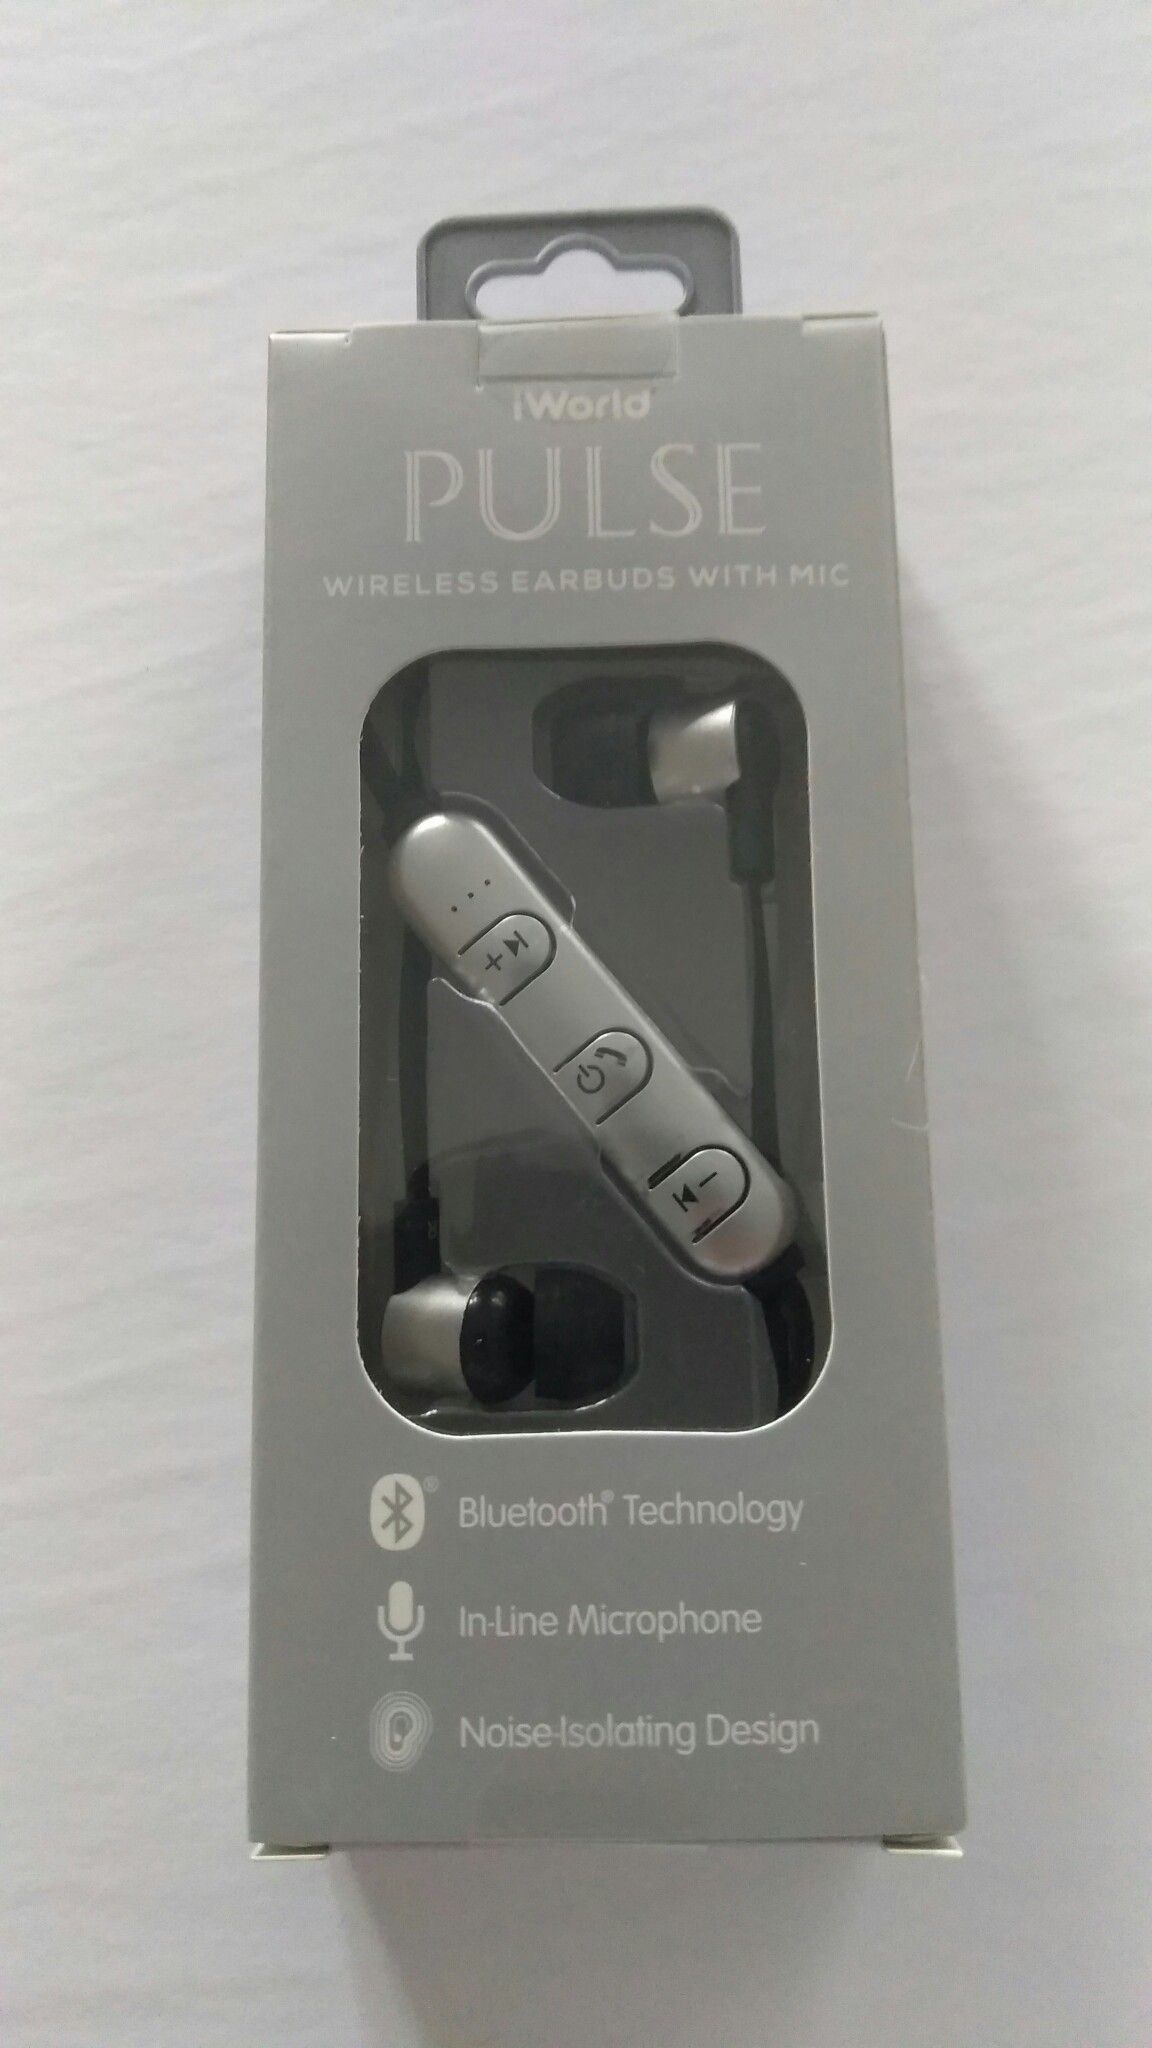 iWorld Pulse earbuds on-line earphones with microphone compatible Android iPhone